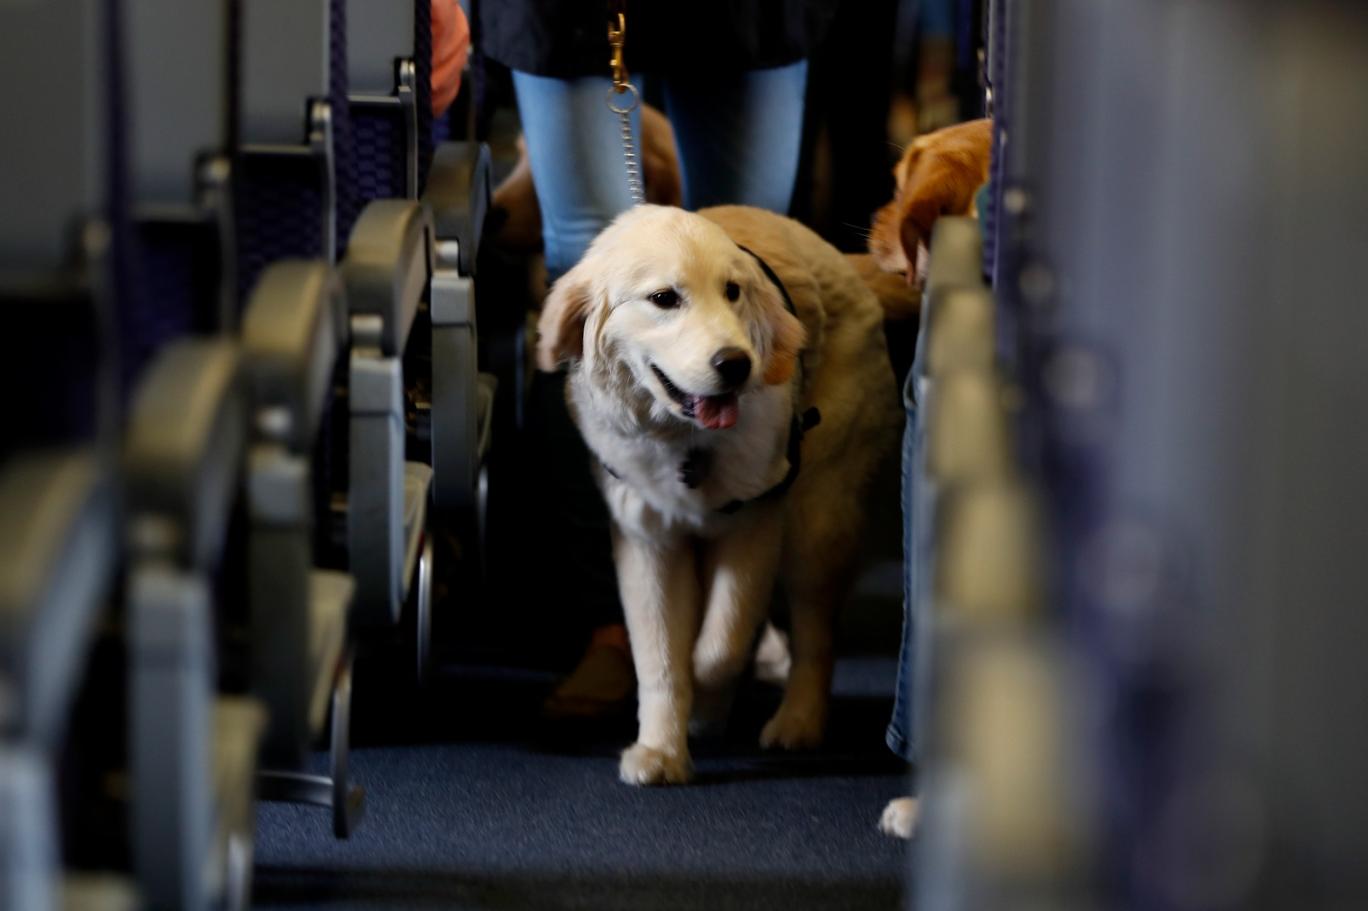 Dog defecating in the aisle of an airplane forced emergency landing